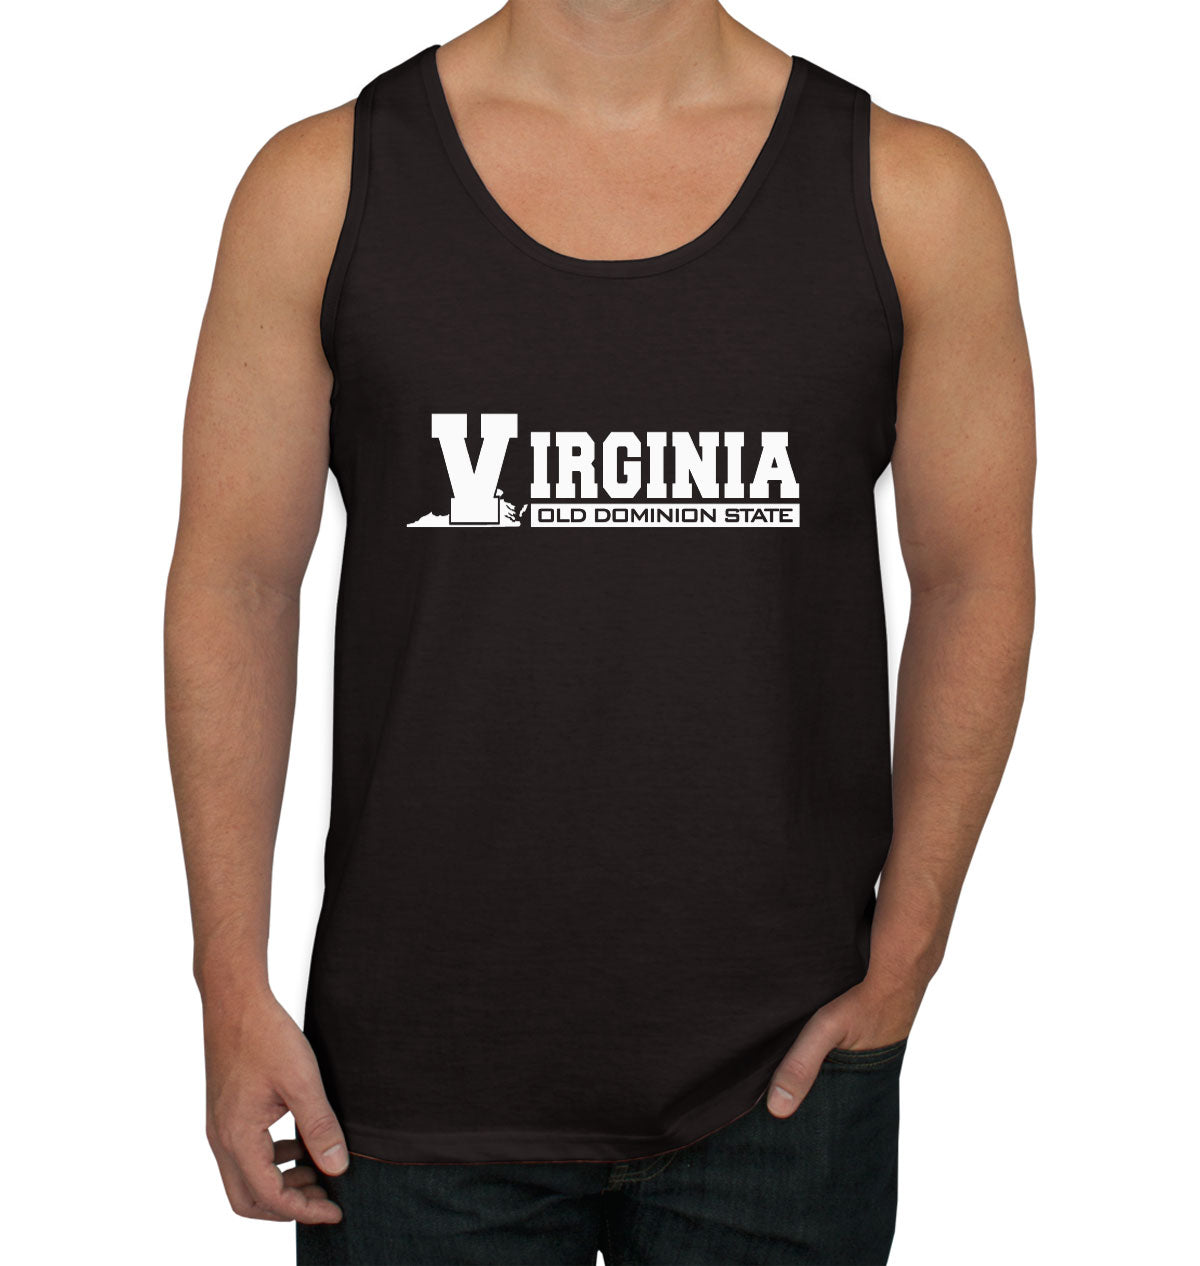 Virginia Old Dominion State Men's Tank Top